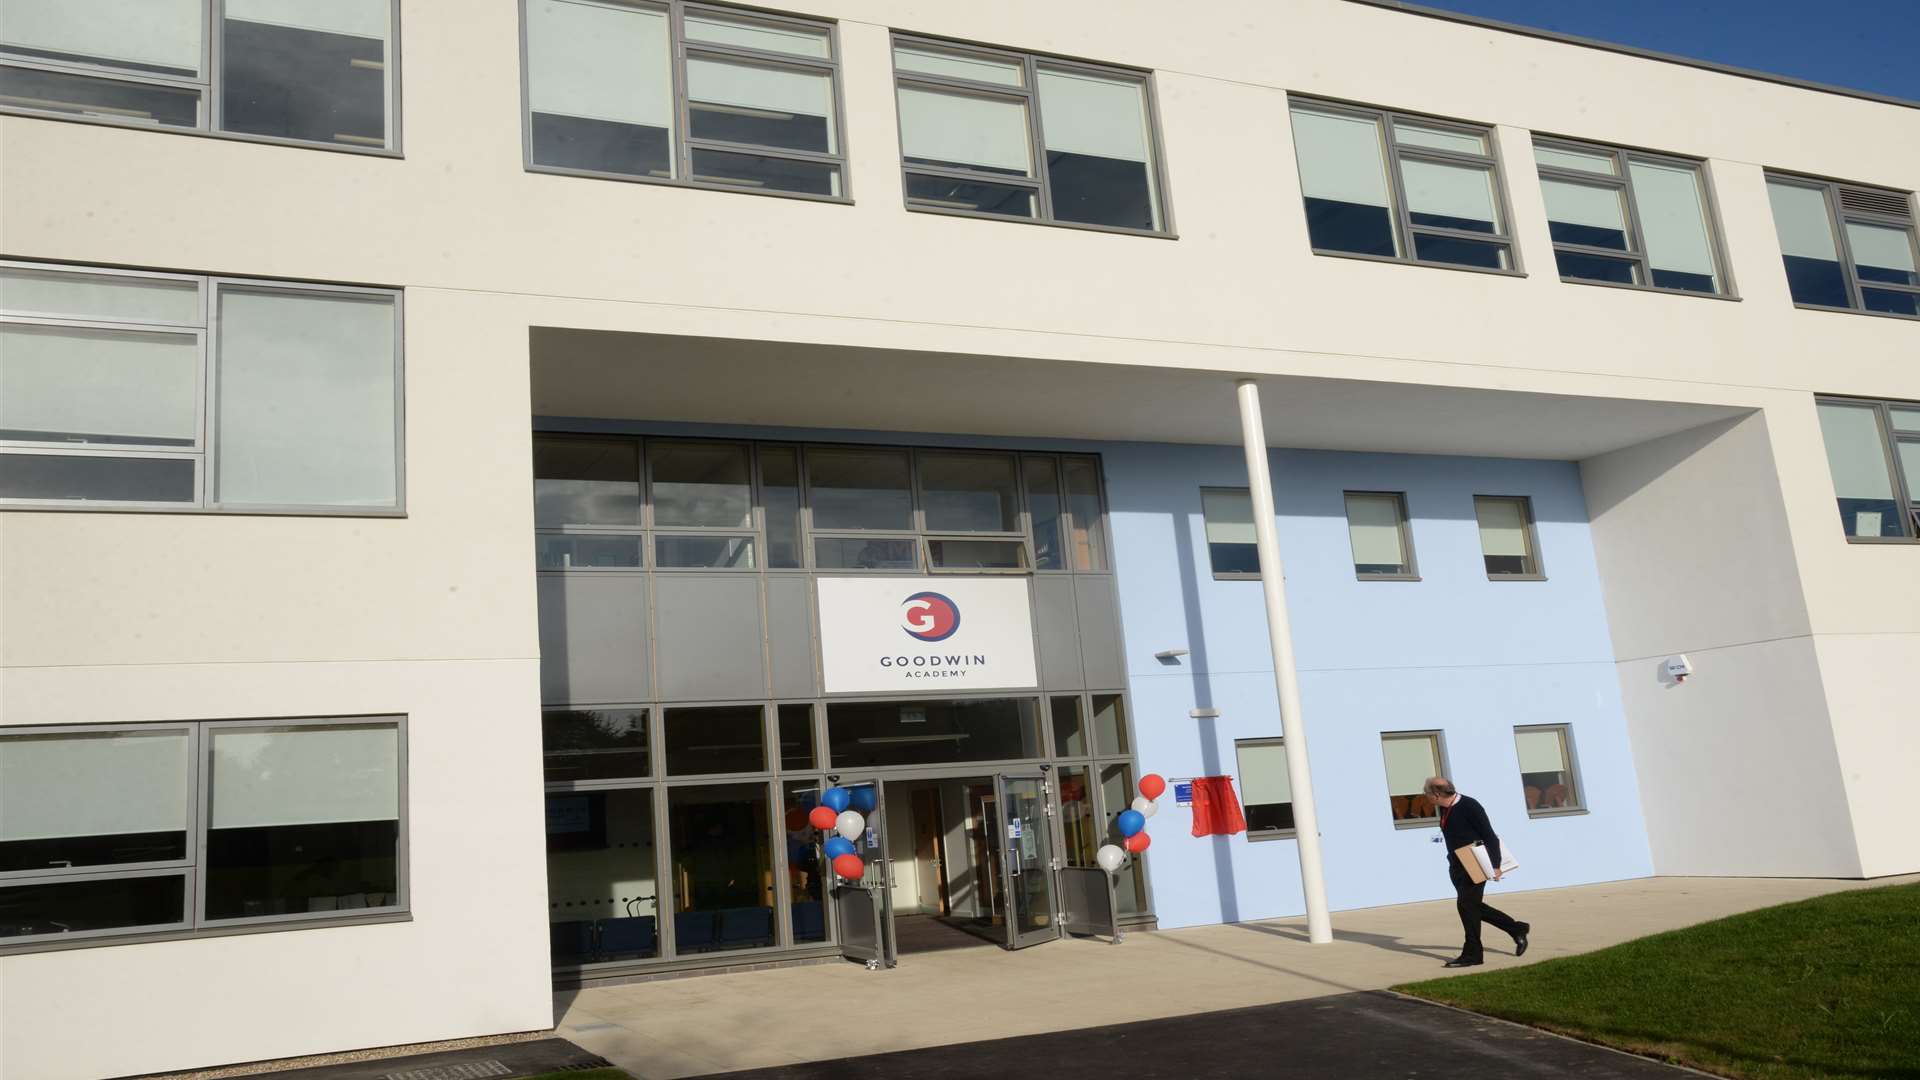 The new Goodwin Academy in Hamilton Road, Deal